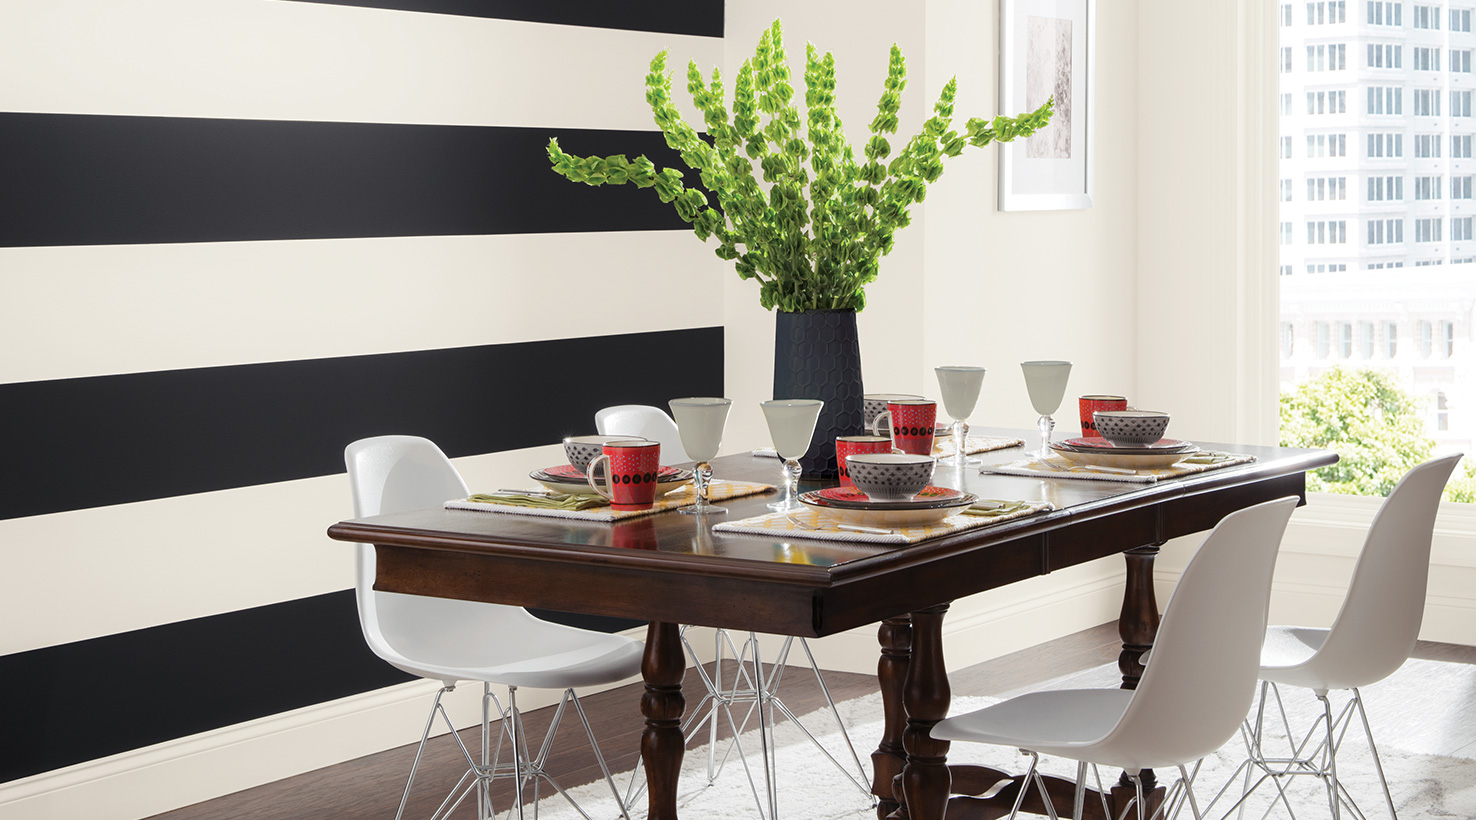 Dining Room Paint Color Ideas, Dining Room Paint Color Ideas Pictures